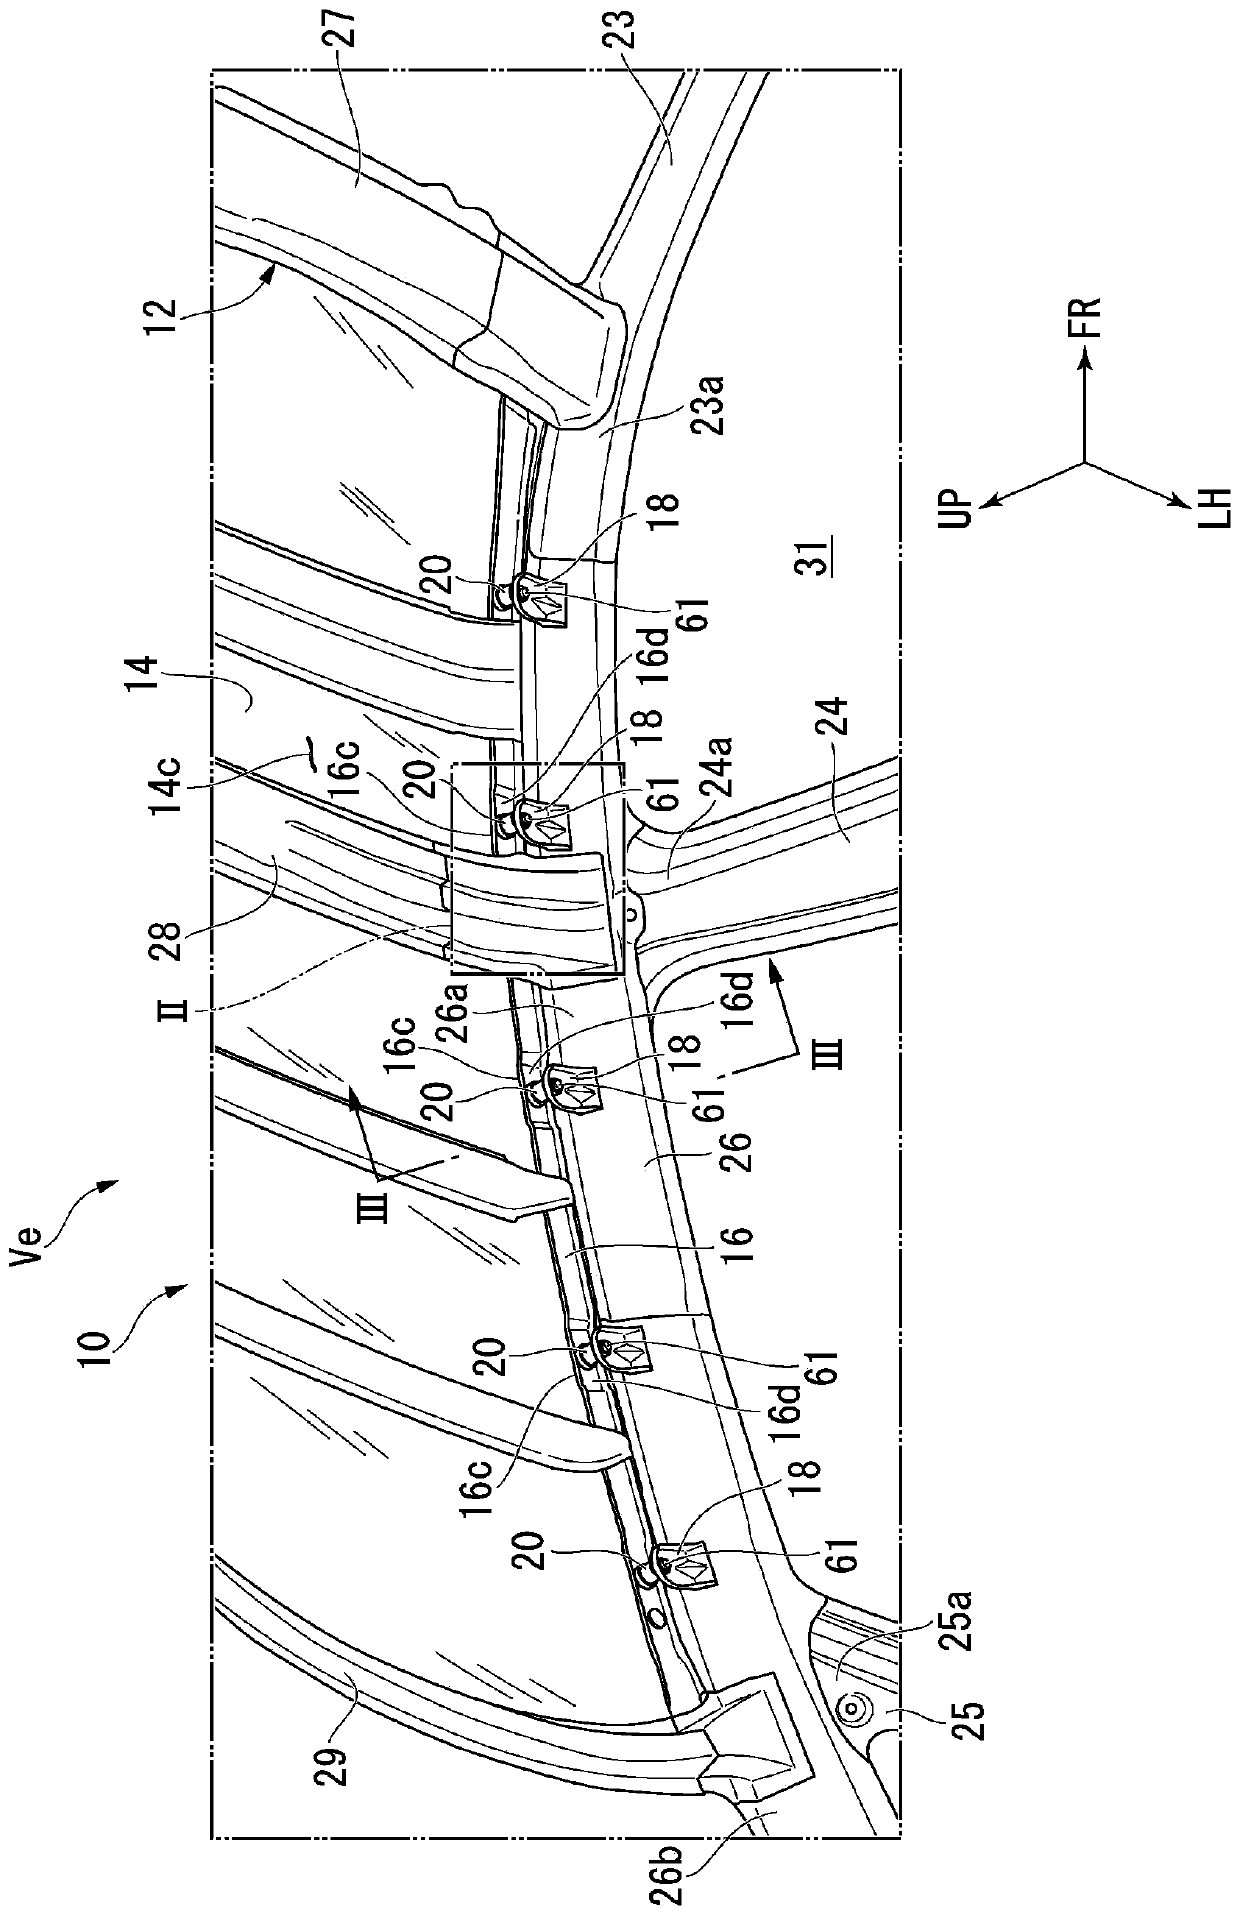 Article fixation apparatus and article fixation structure assembly method